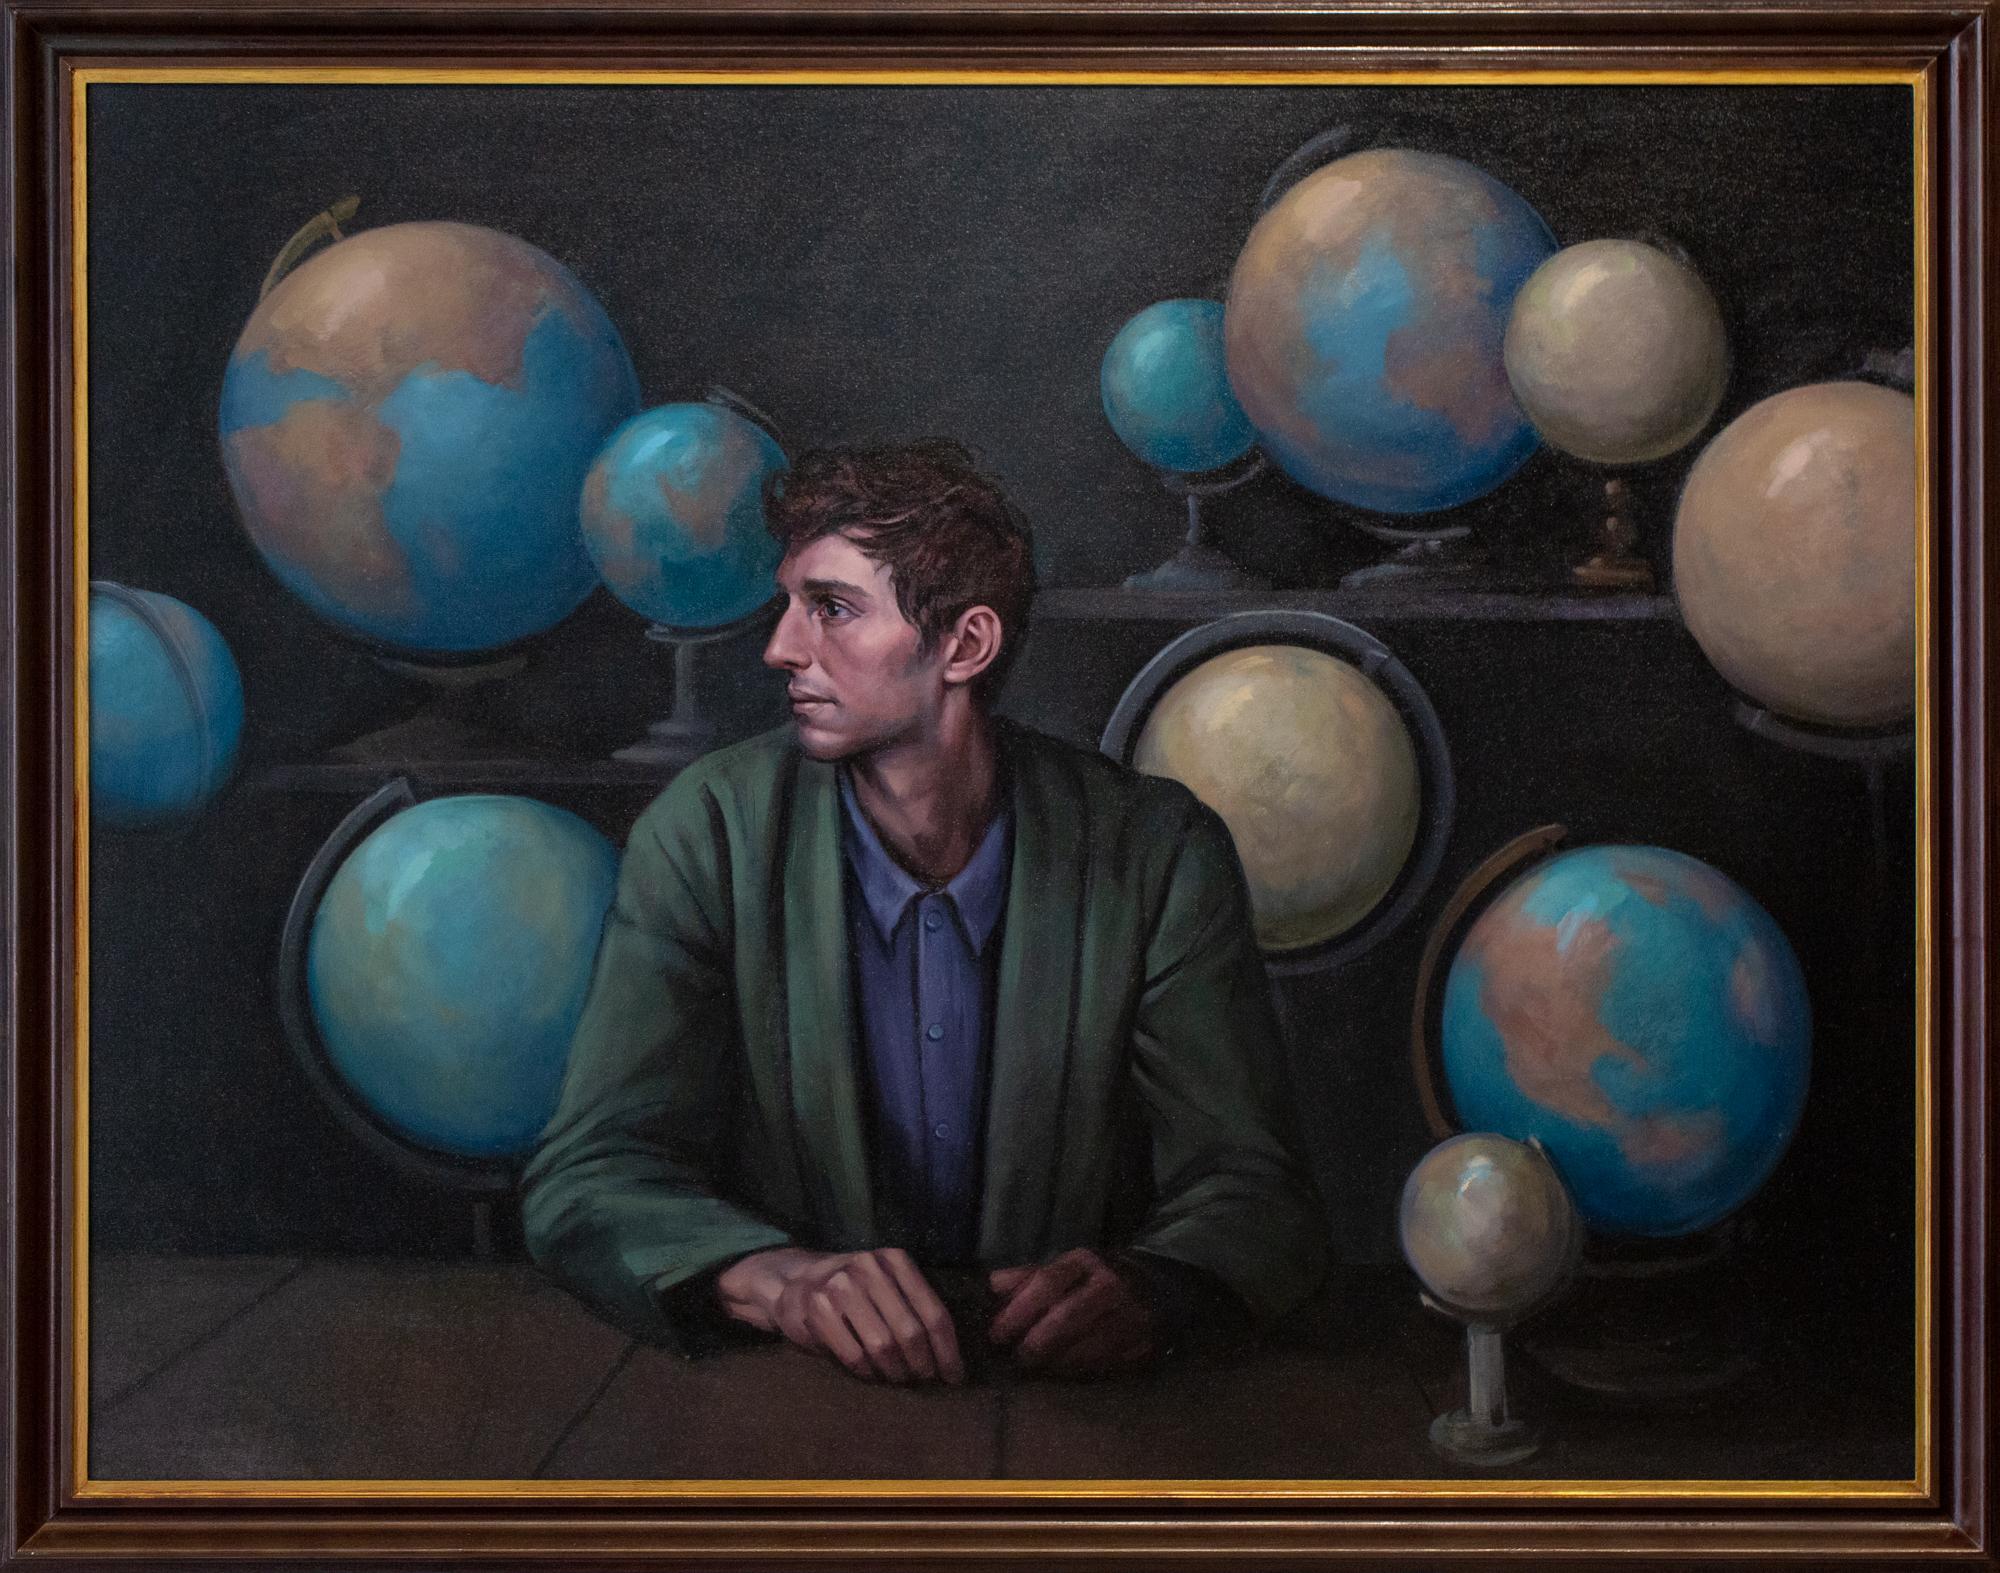 Katherine Fraser Portrait Painting - "Sphere", Large Oil Painting of Pensive Man with Globes, Planets